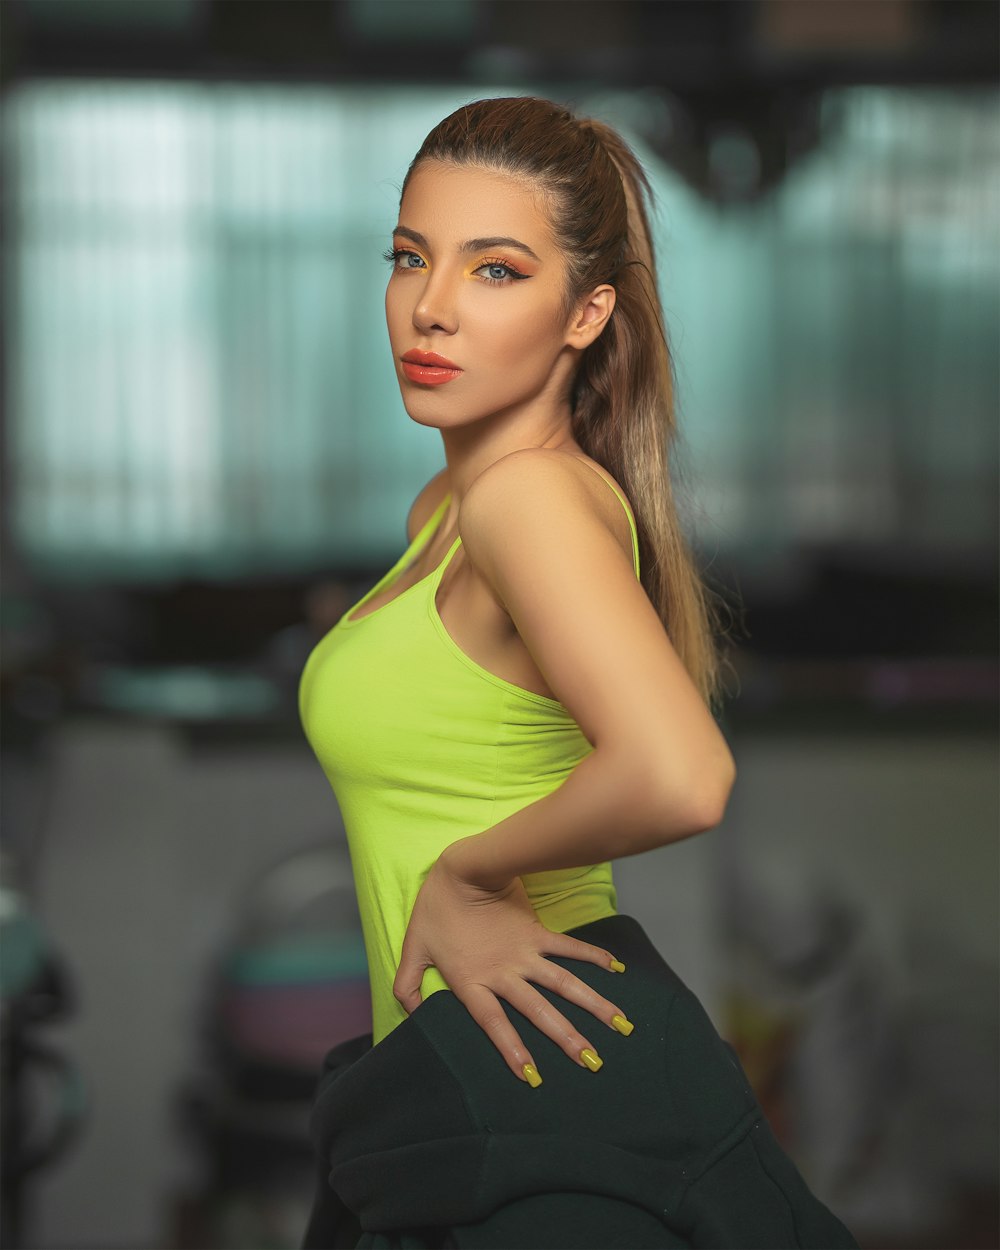 selective focus photography of woman wearing green tank top making pose